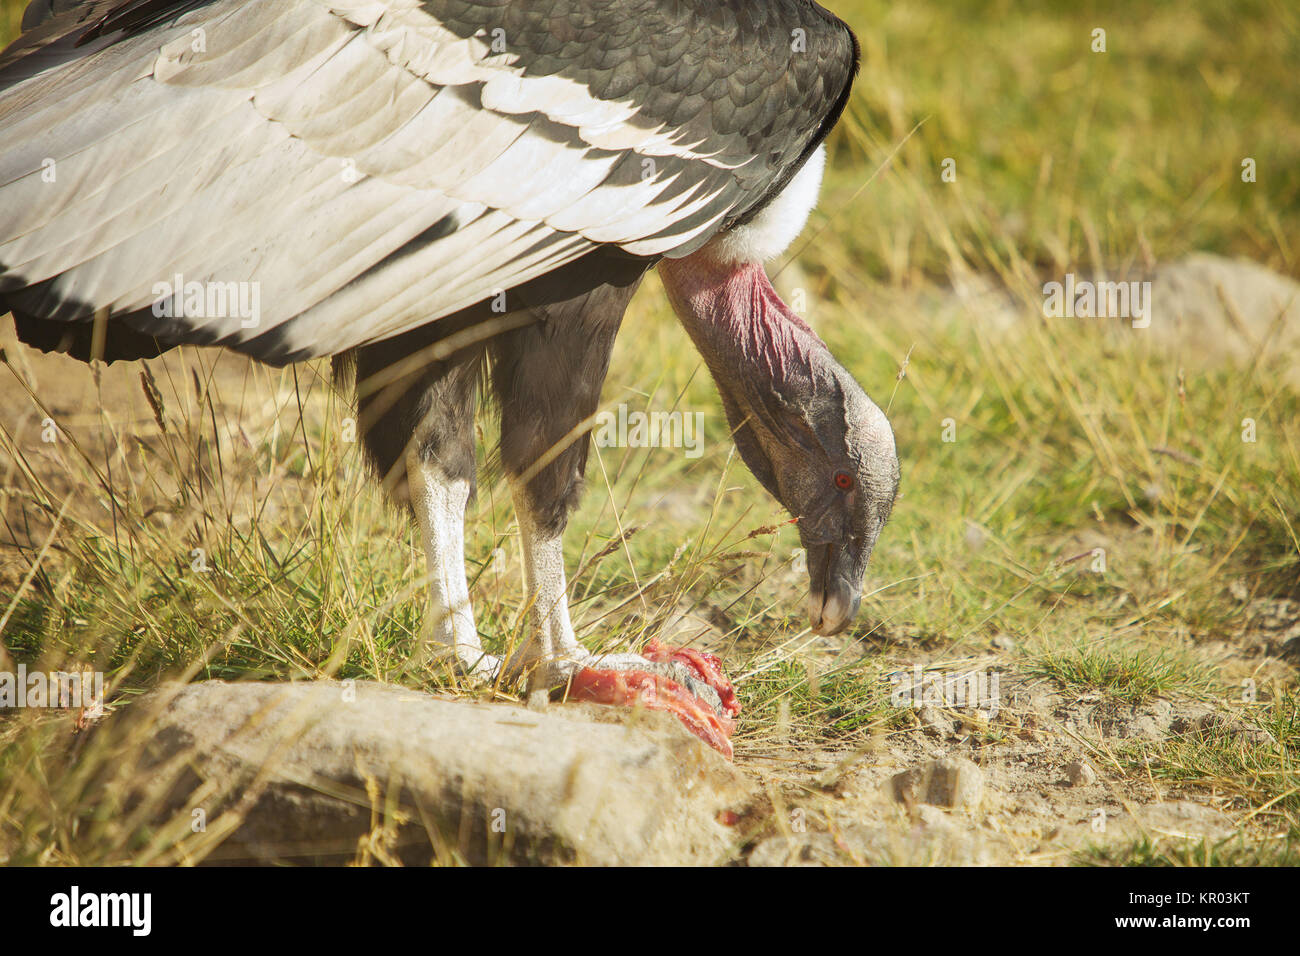 Condor Eating Lunch Stock Photo